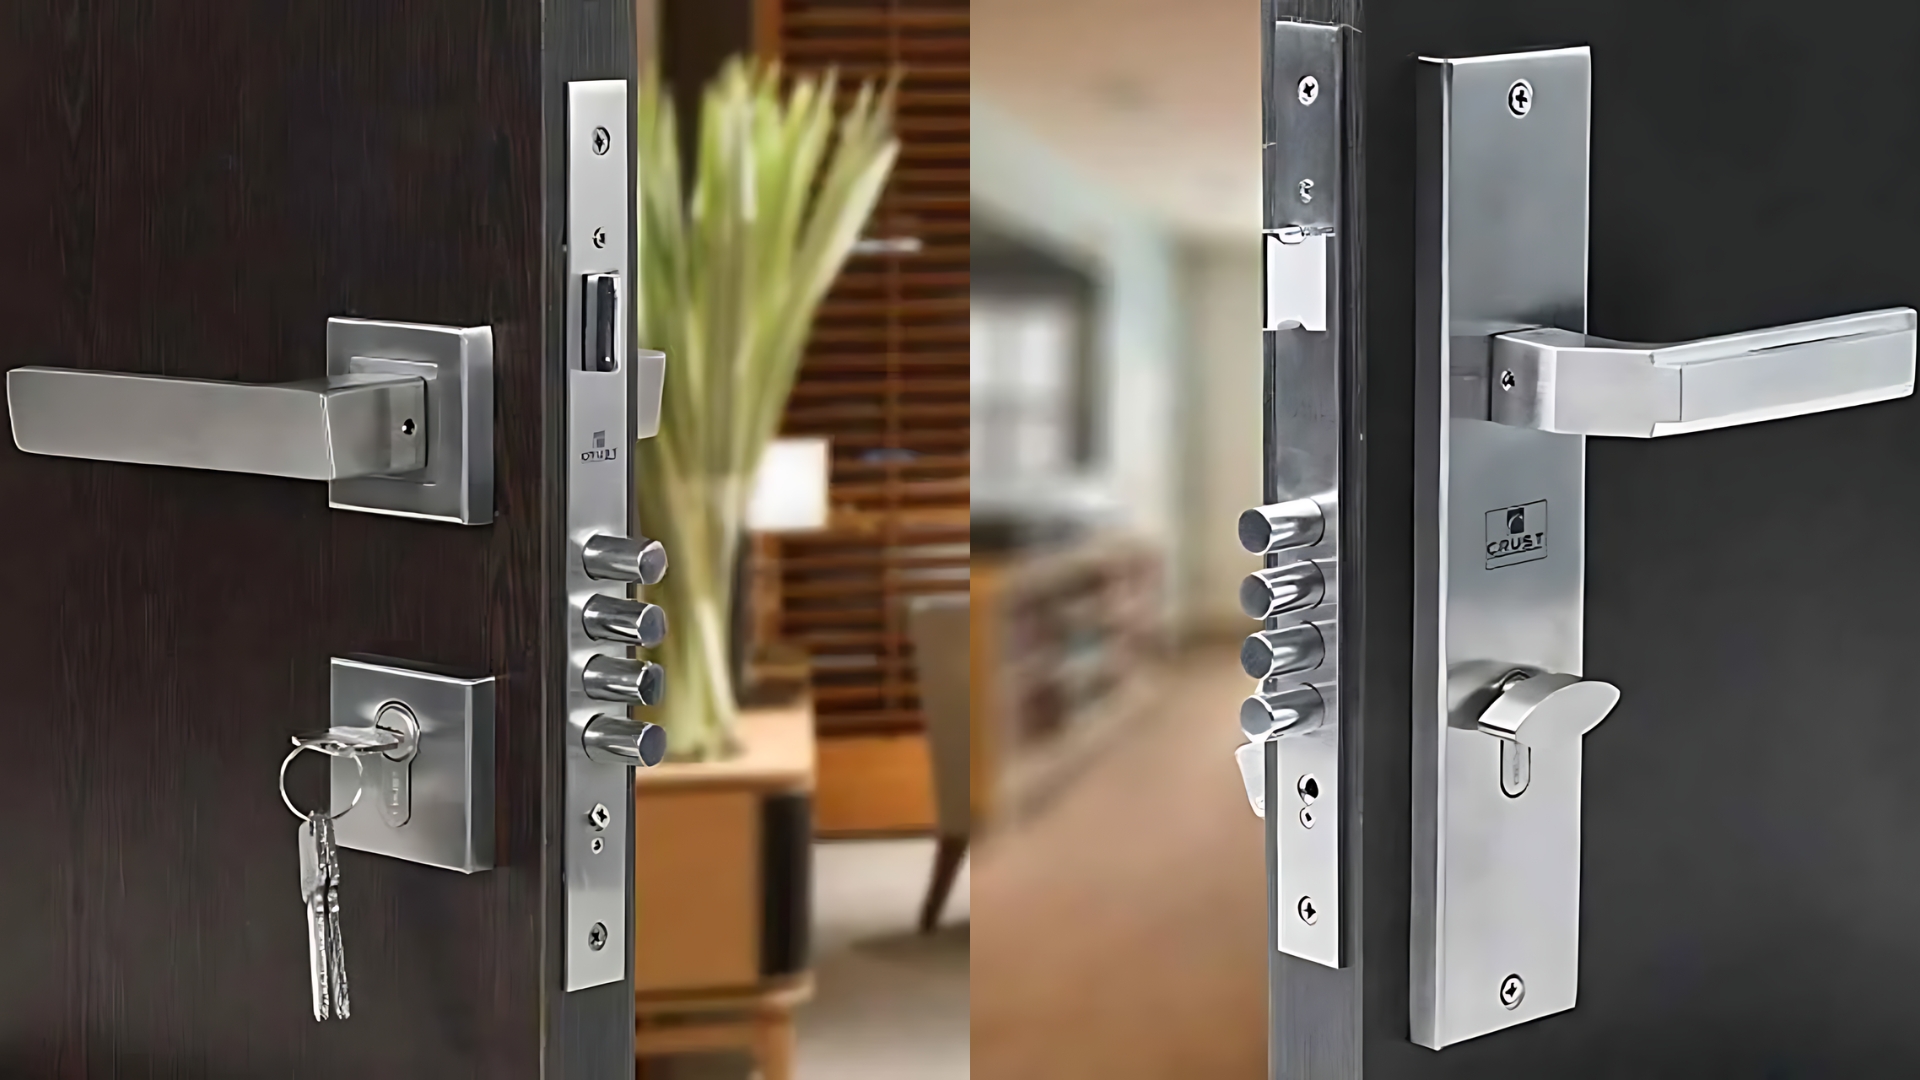 Side-by-side views of multipoint door locks on interior doors, highlighting advanced security features.